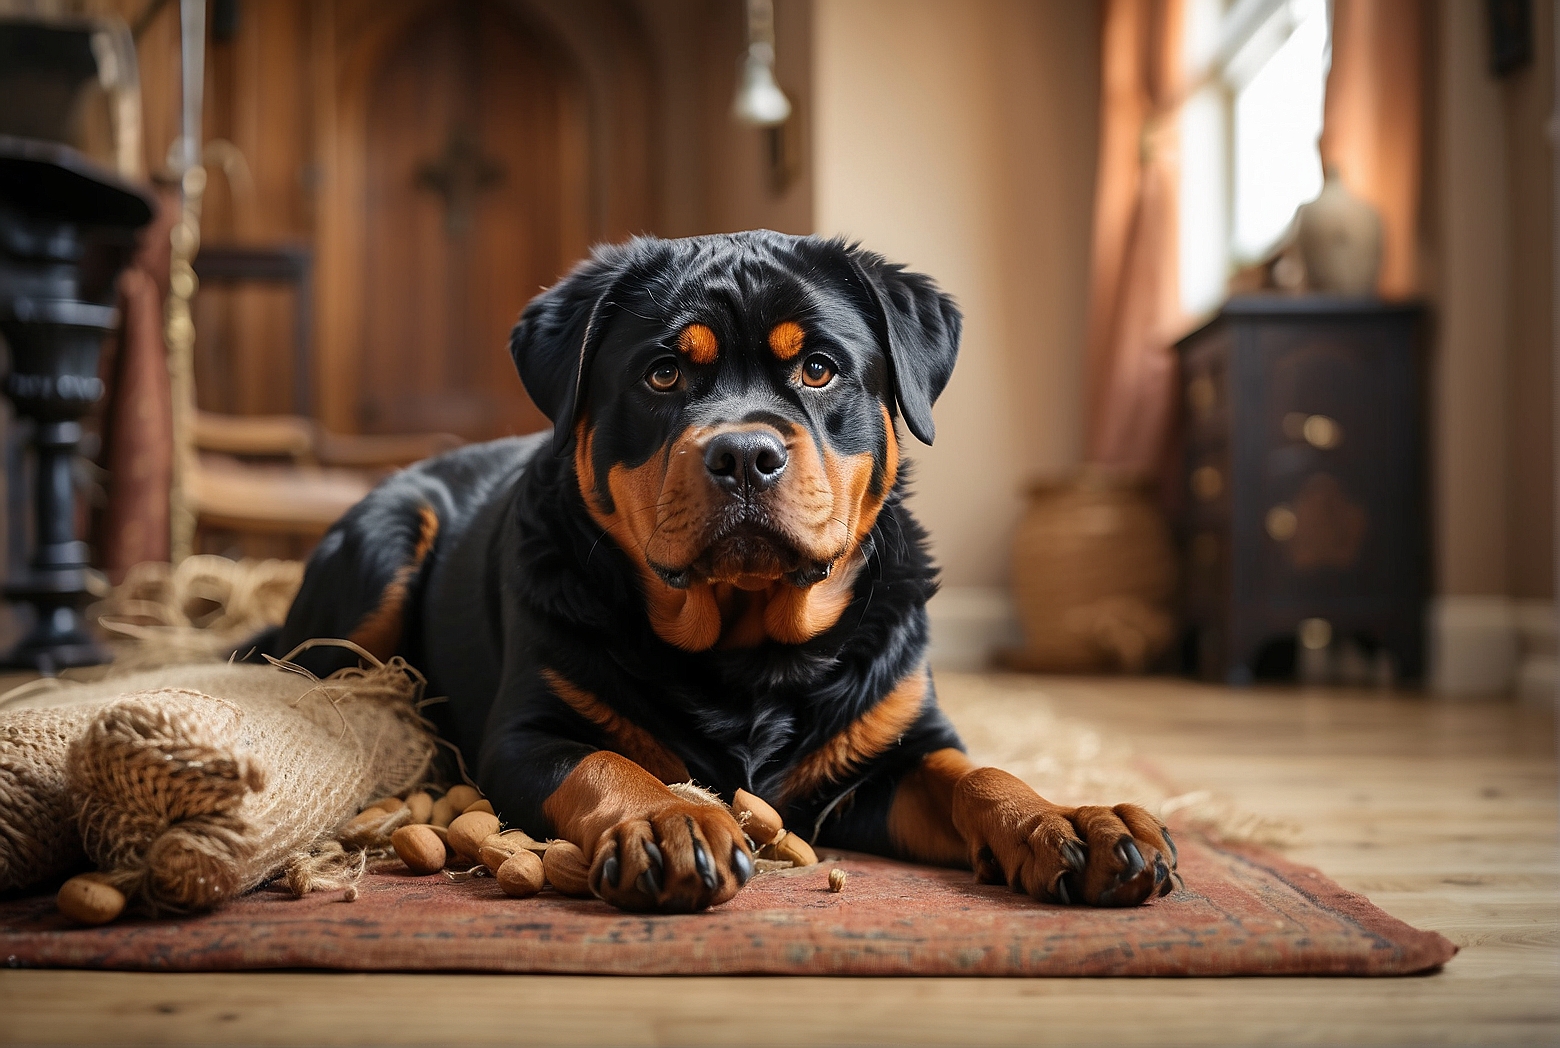 Fun Activities for Keeping Your Rottweiler Entertained